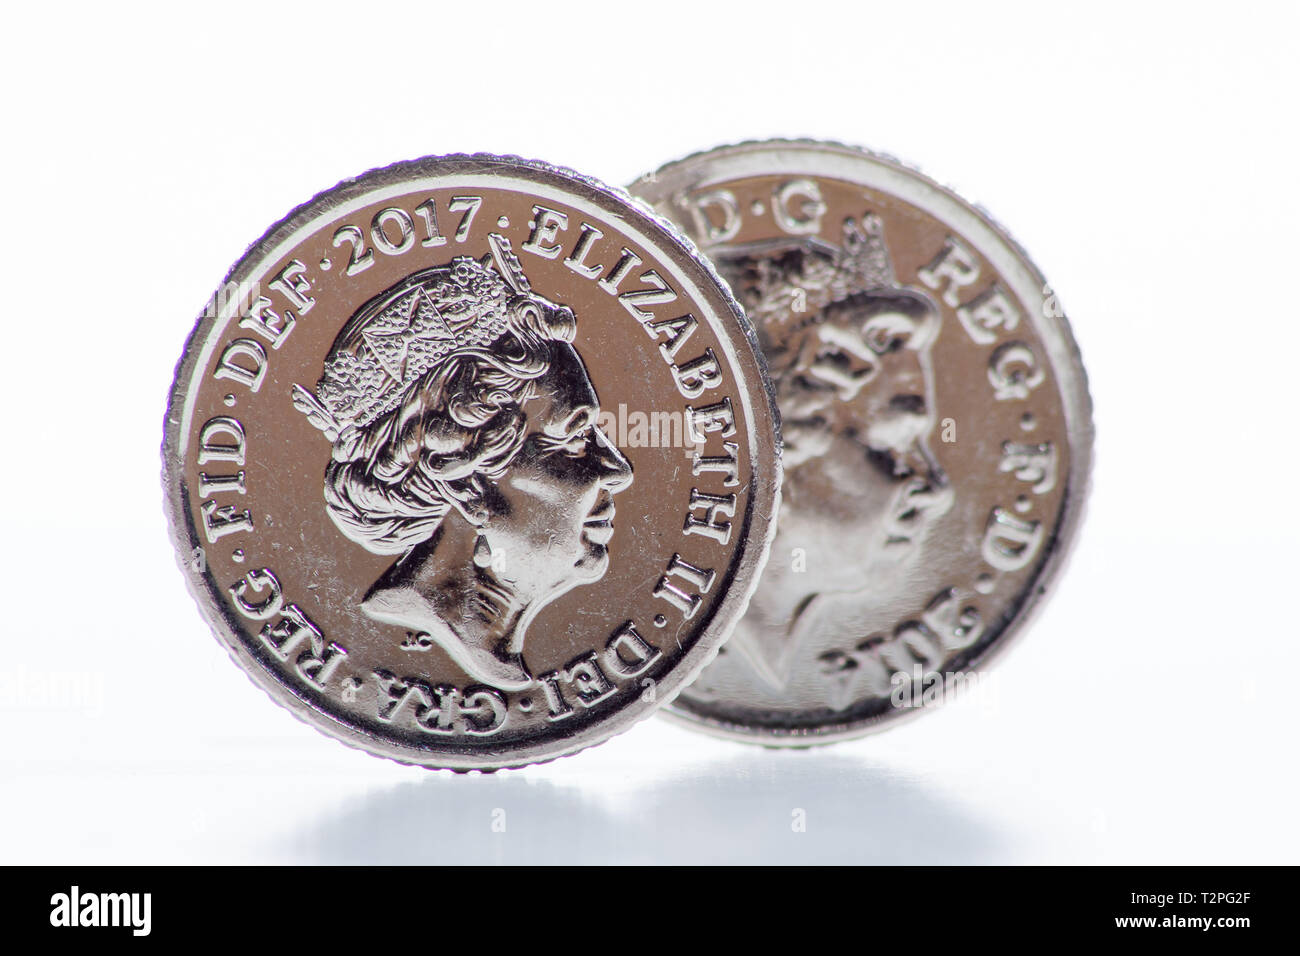 Coins. The Two Pence Piece.  This is the smallest silver coin denomination in the Sterling currency. Stock Photo